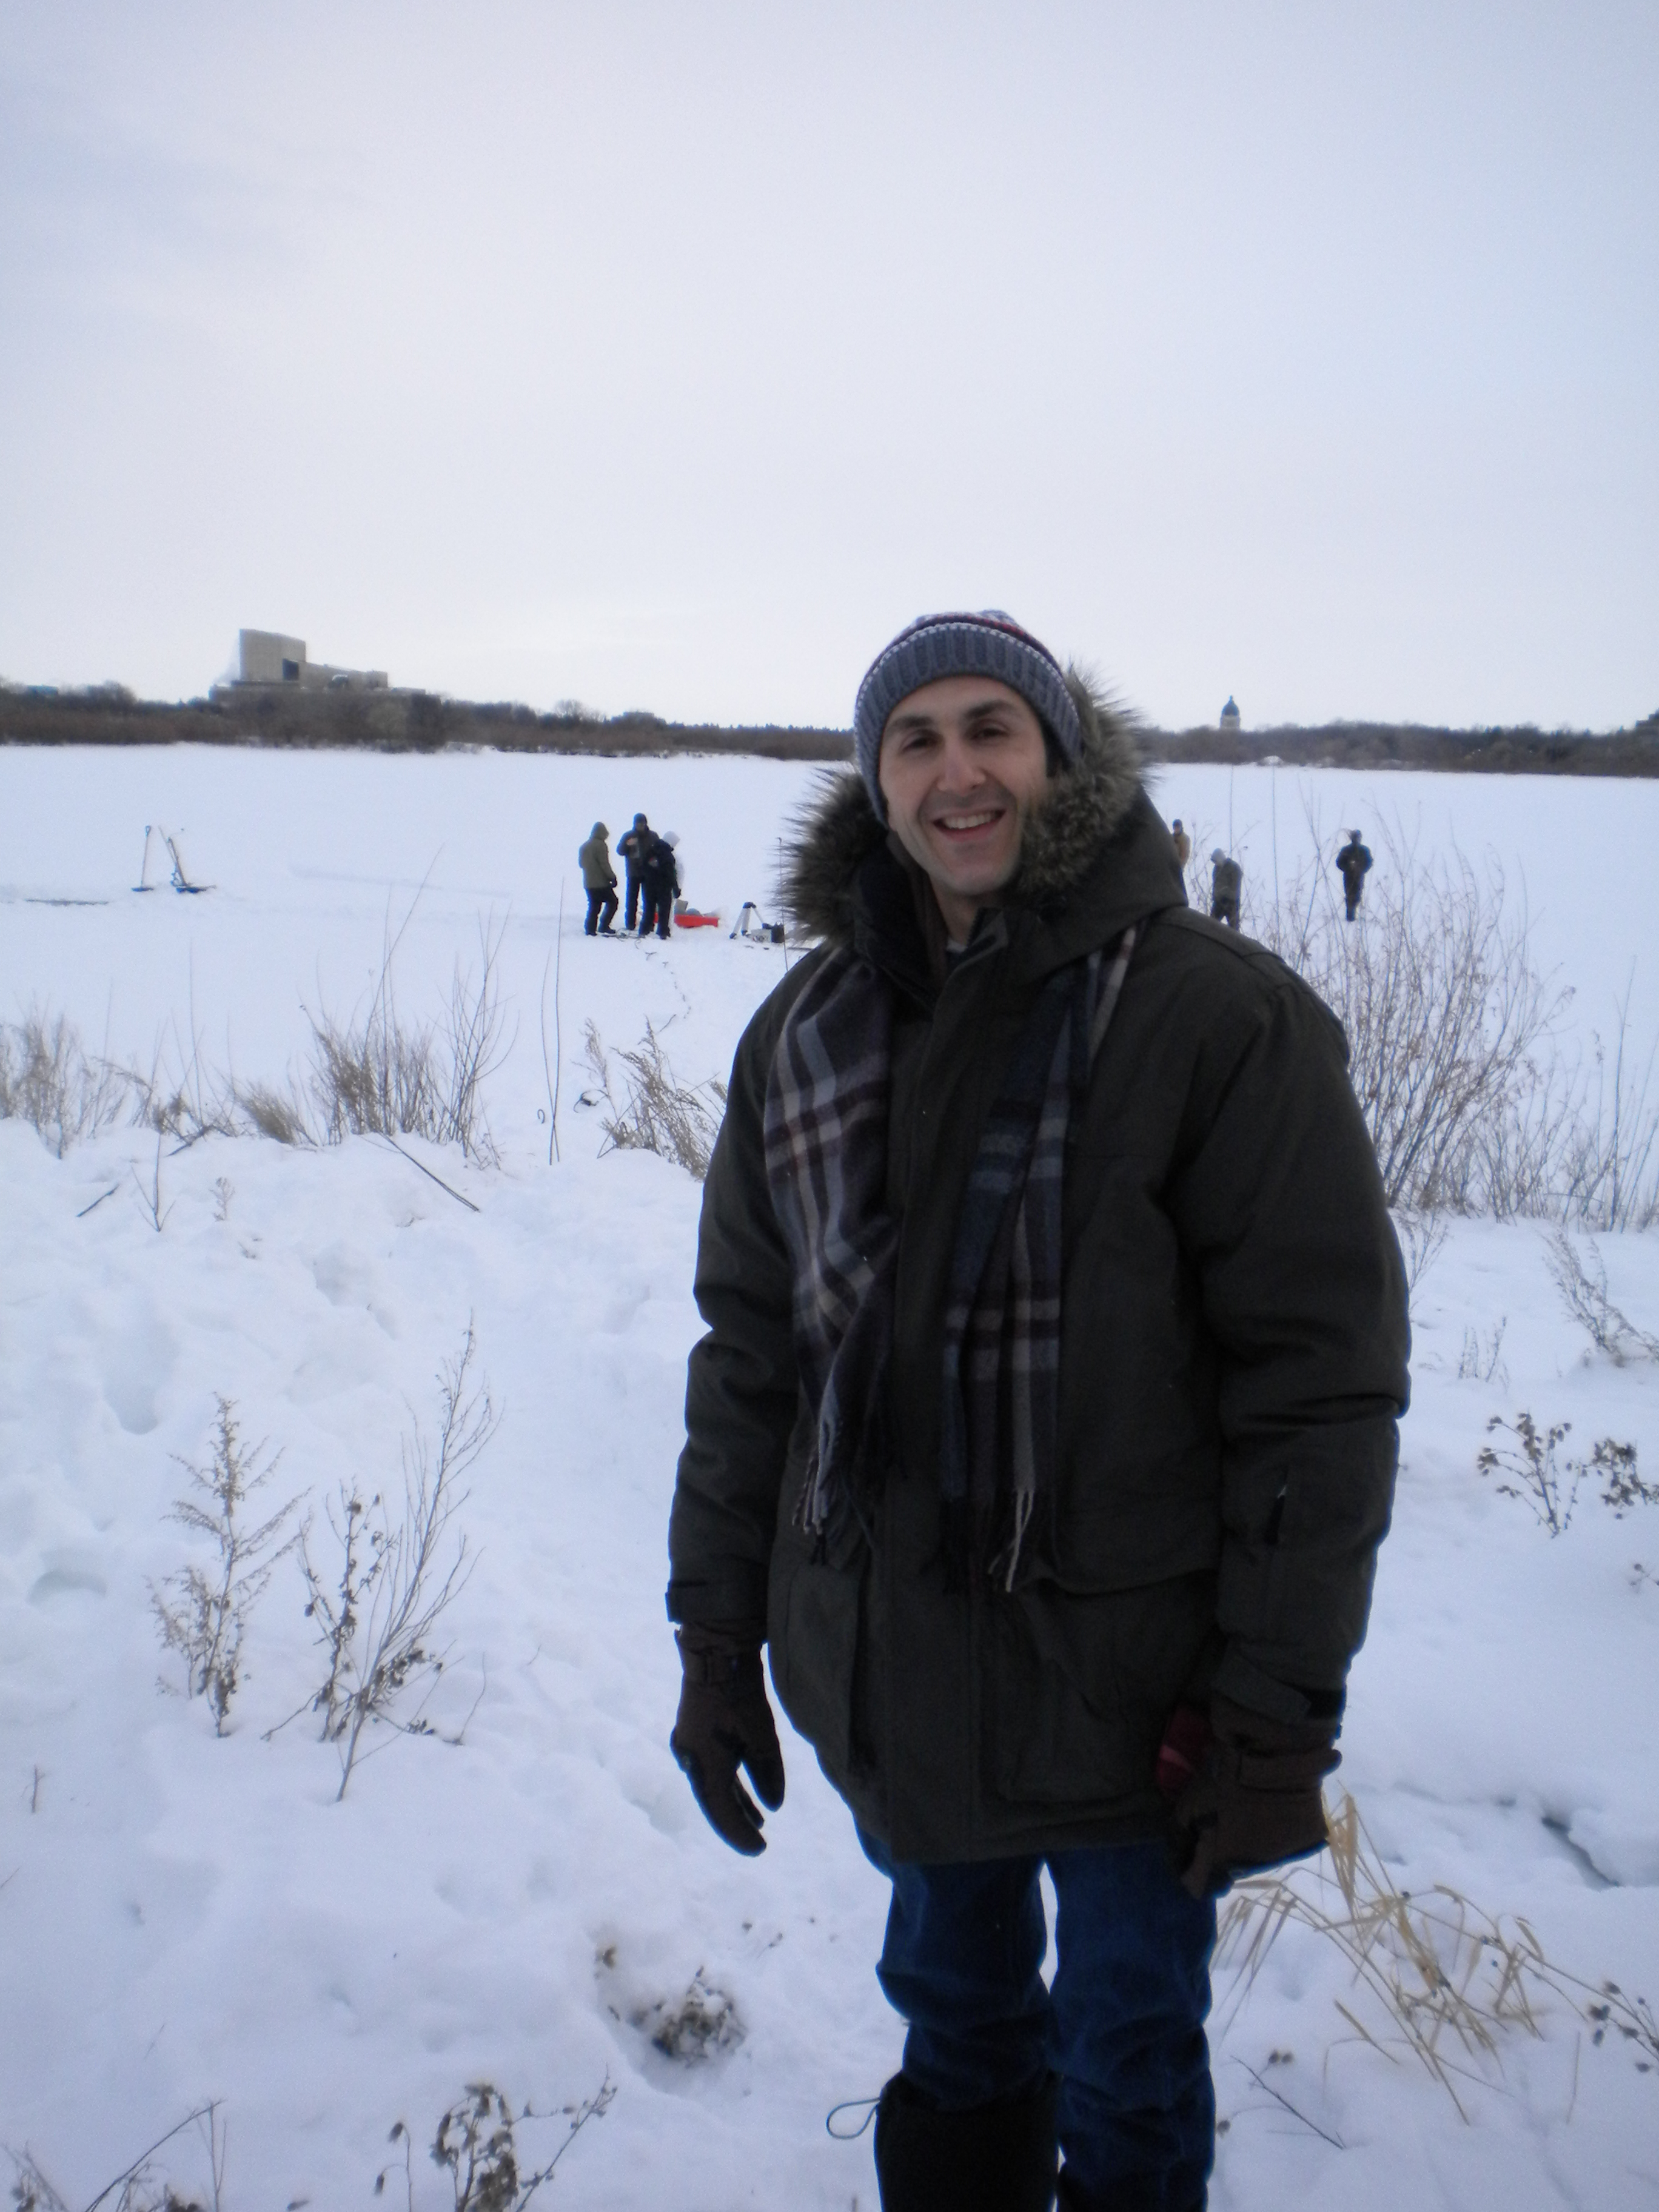 On the set of a frozen lake in Regina, Saskatchewan about to do a Polar Bear Swim for the shoot!